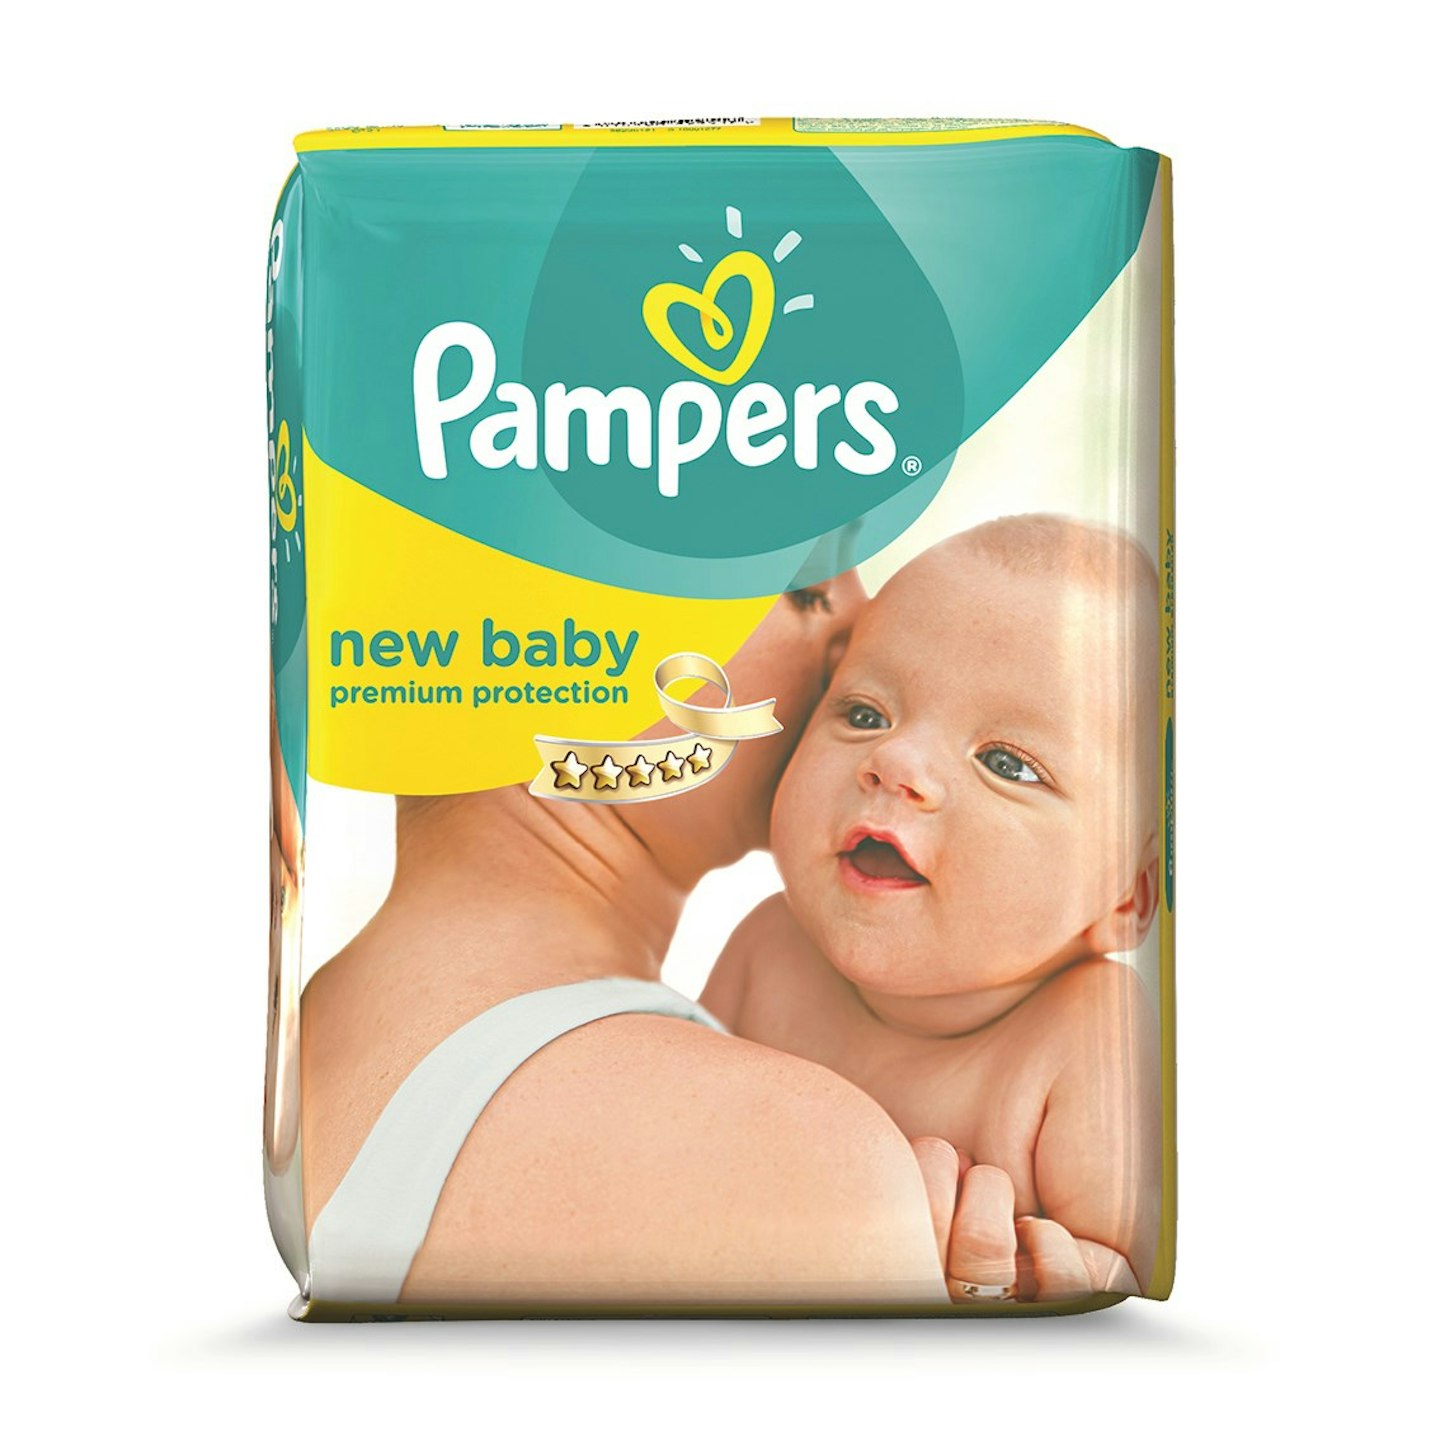 Pampers New Baby Nappies